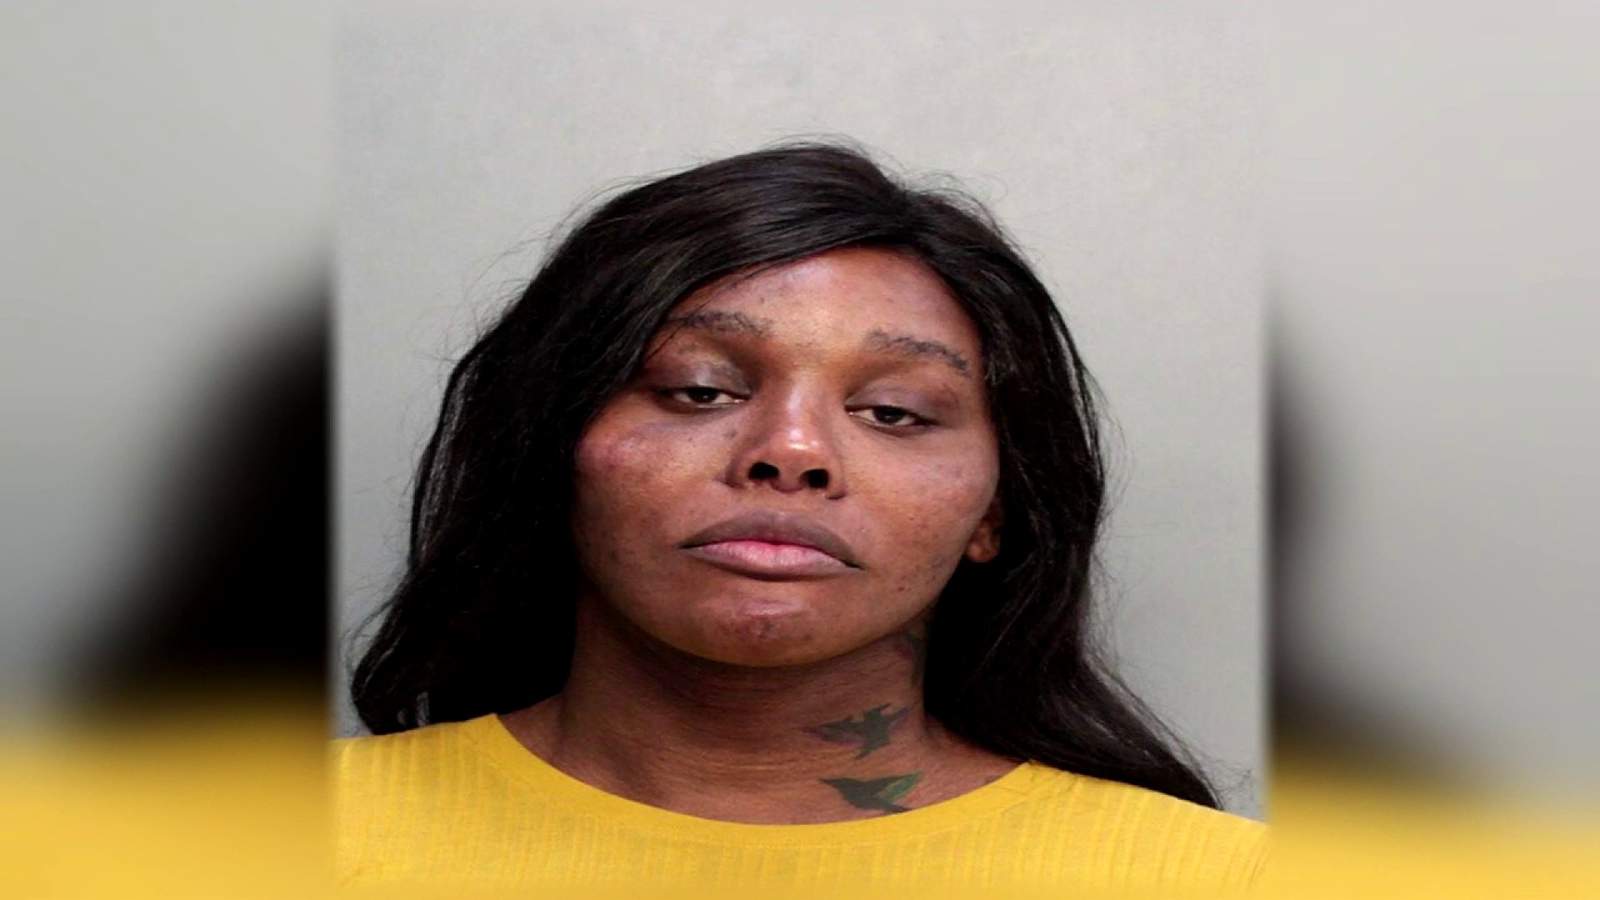 Woman accused of robbing man of nearly $500,000 in jewelry, cash